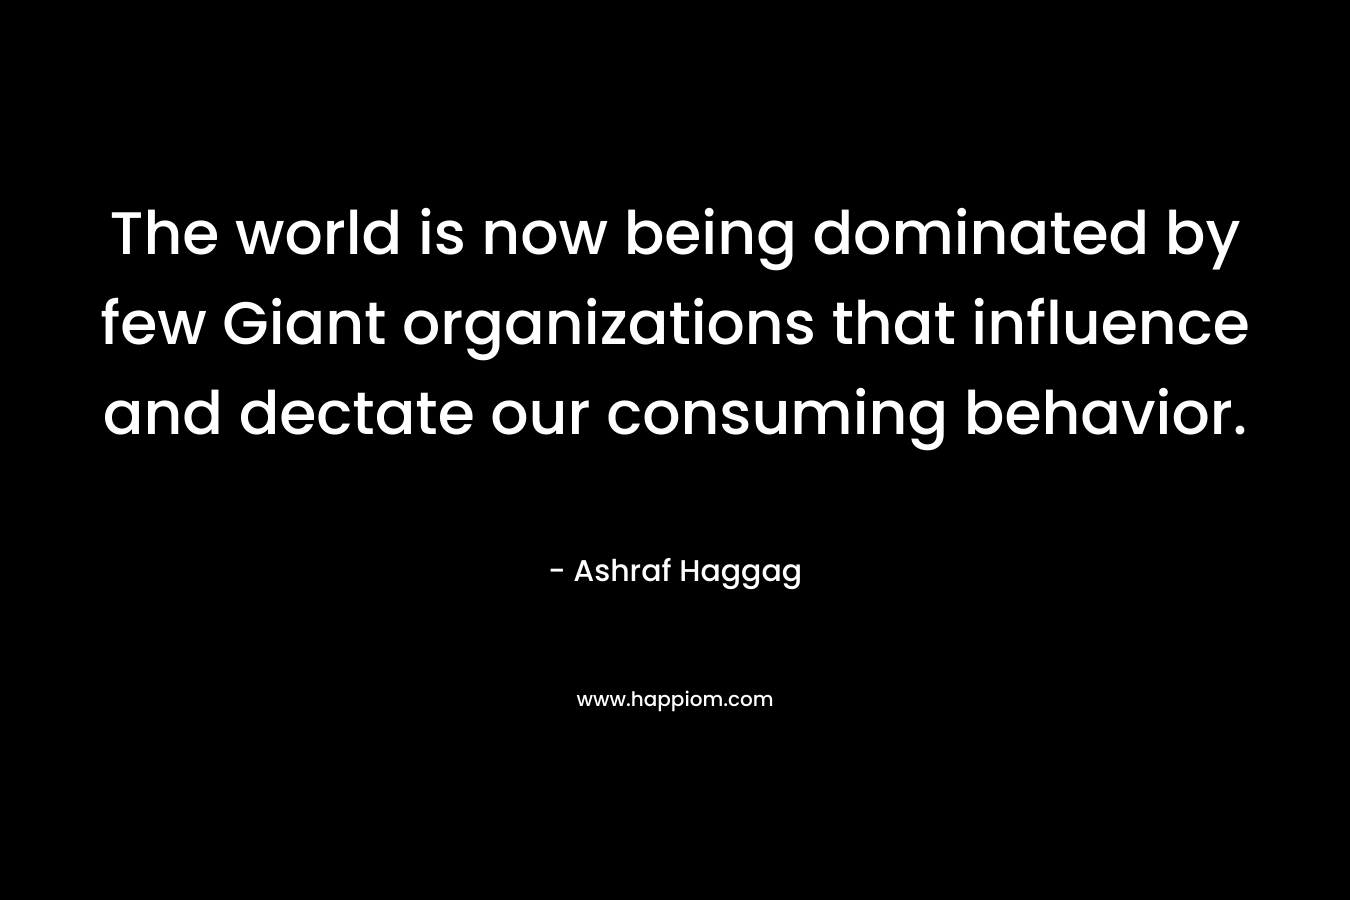 The world is now being dominated by few Giant organizations that influence and dectate our consuming behavior. – Ashraf Haggag